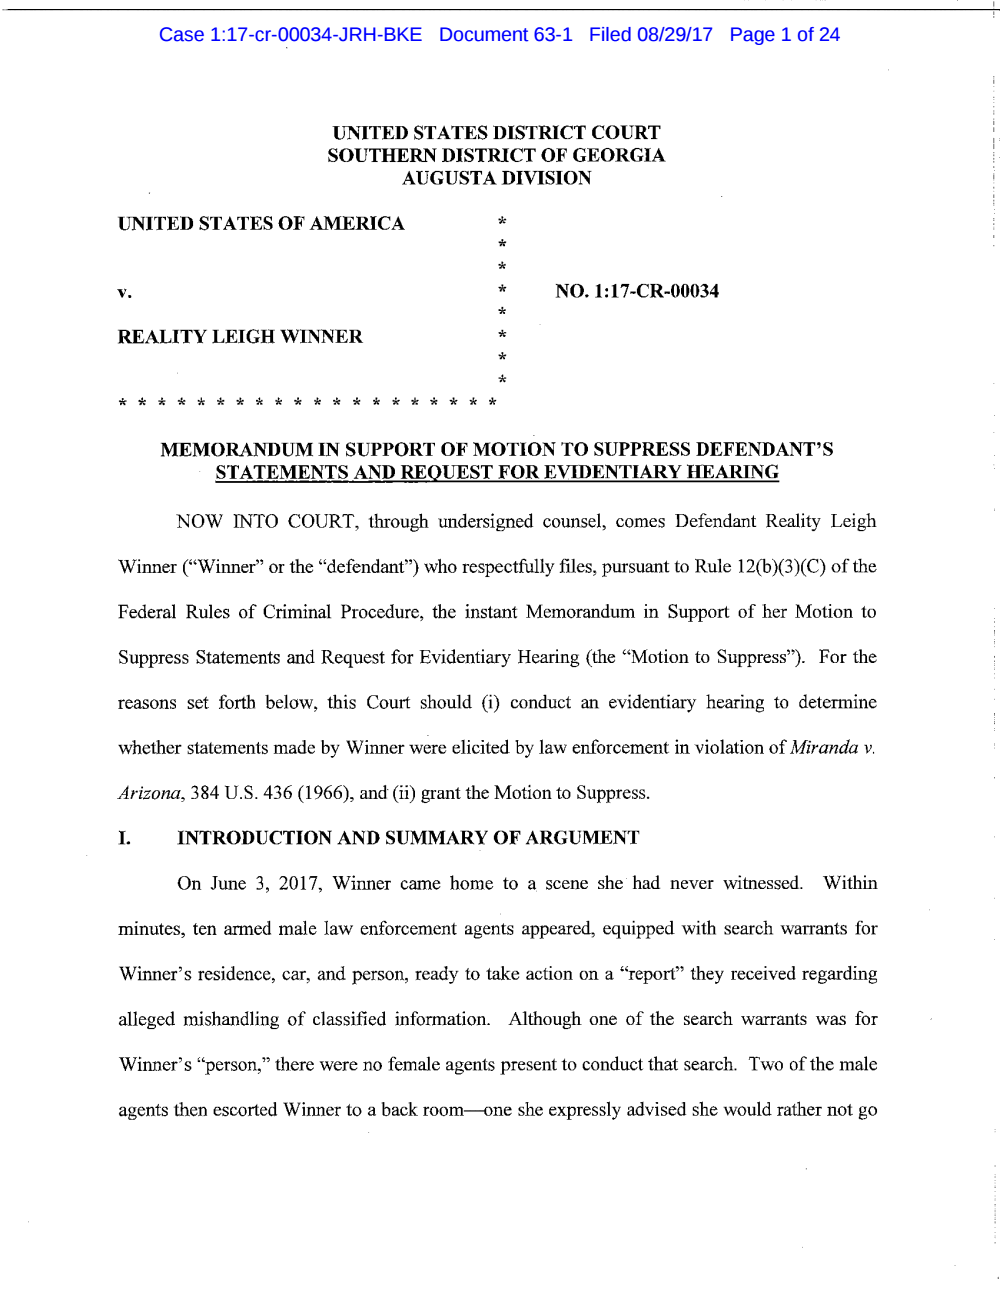 Page 1 from Reality Winner Memo in Support of Motion to Suppress